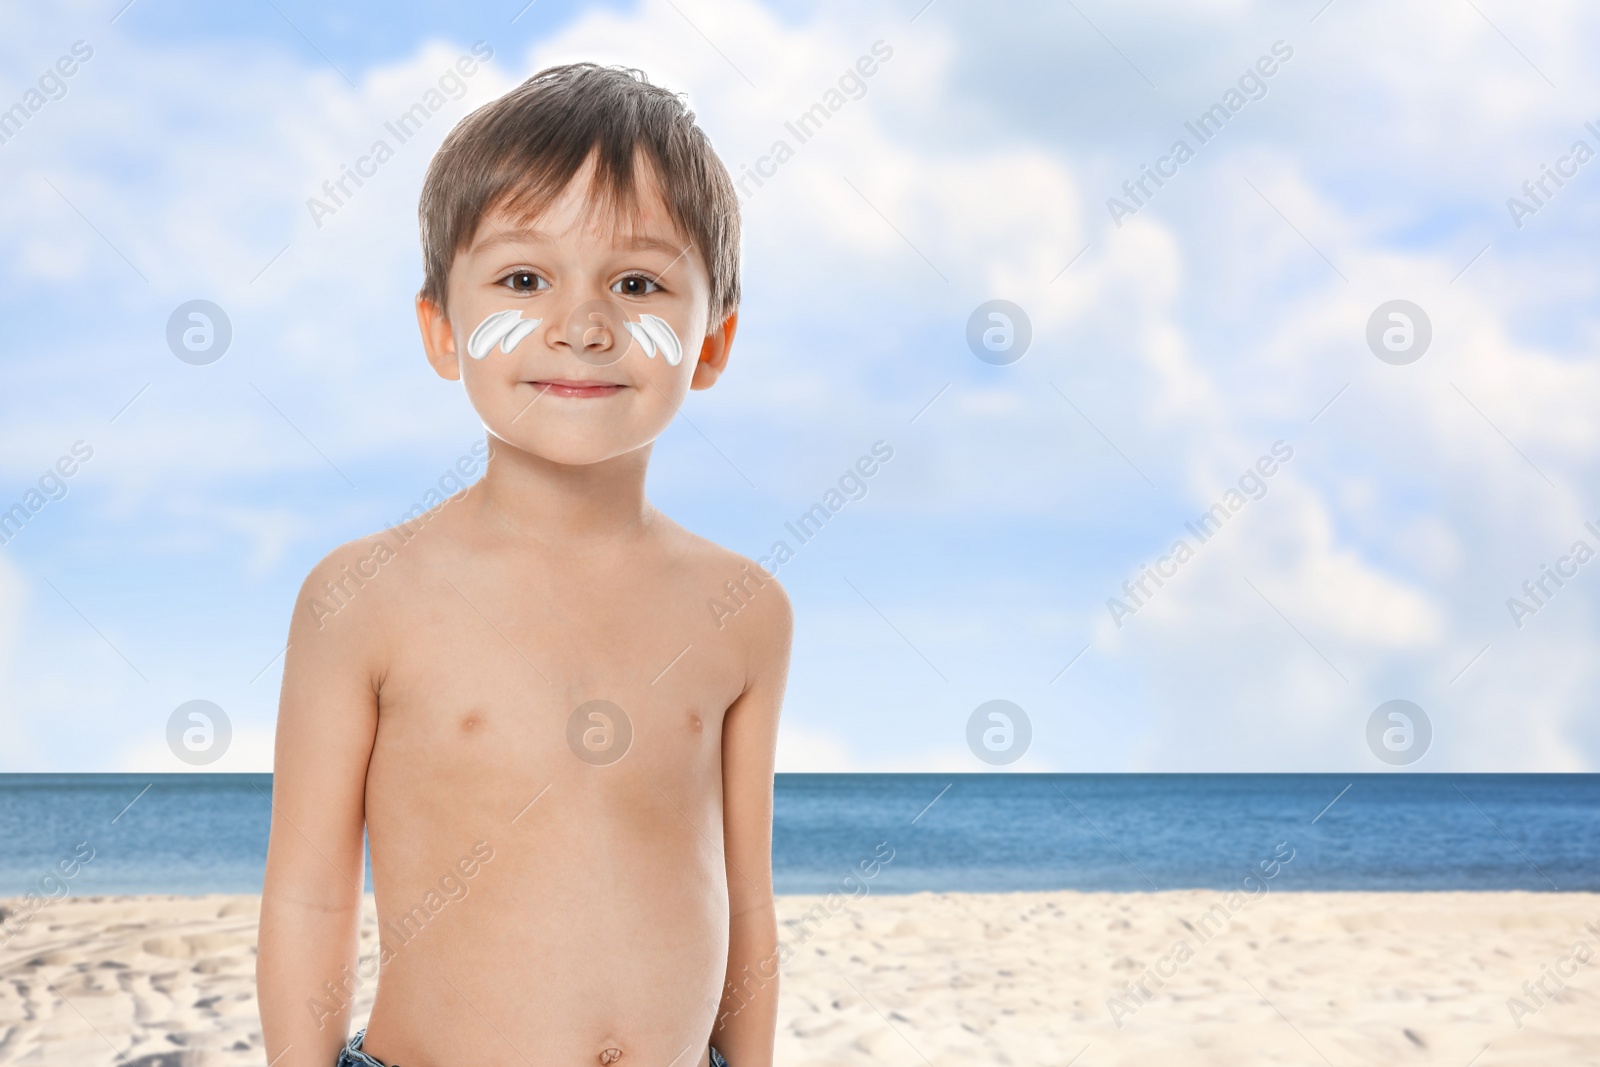 Image of Adorable little boy with sun protection cream on face at sandy beach, space for text 